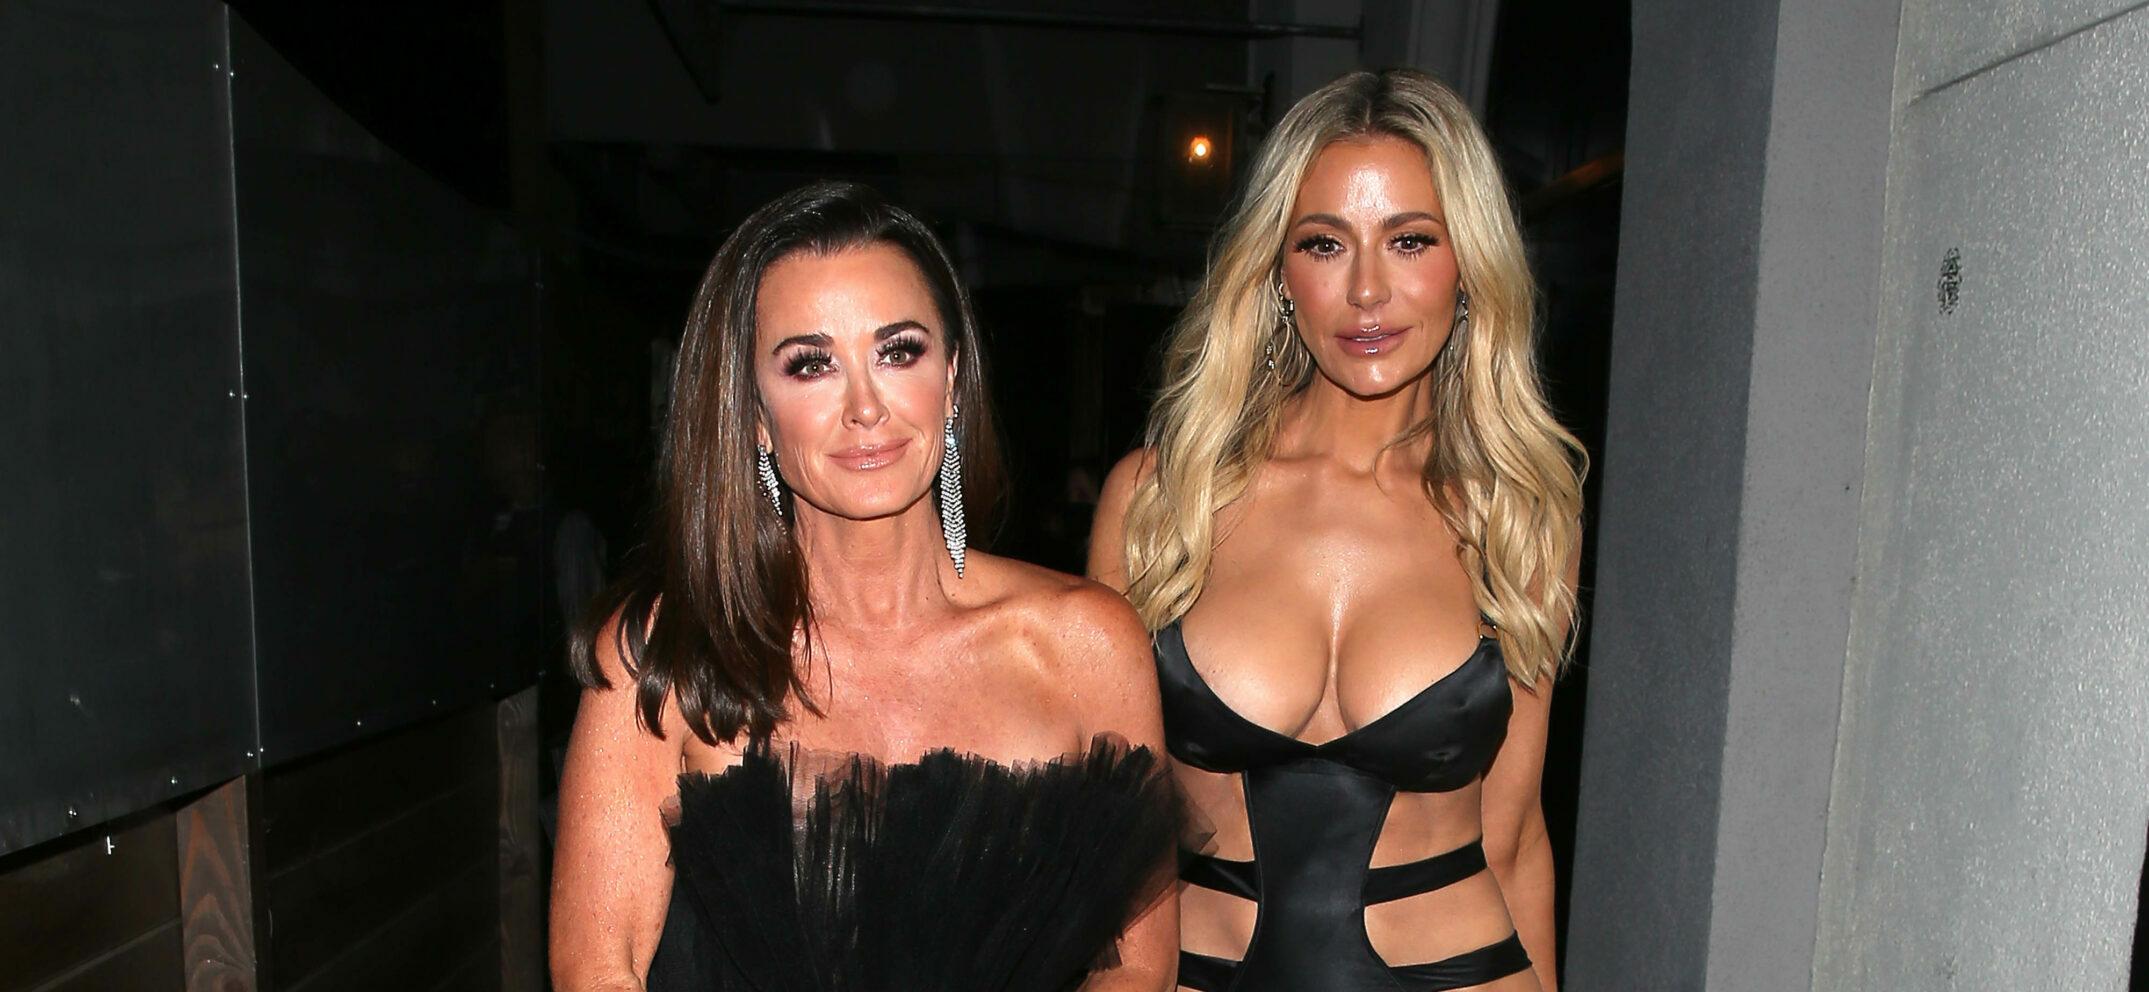 ‘RHOBH’ Star Dorit Kemsley Wishes A Happy Birthday To Her ‘Tiny Dancer’ Kyle Richards!